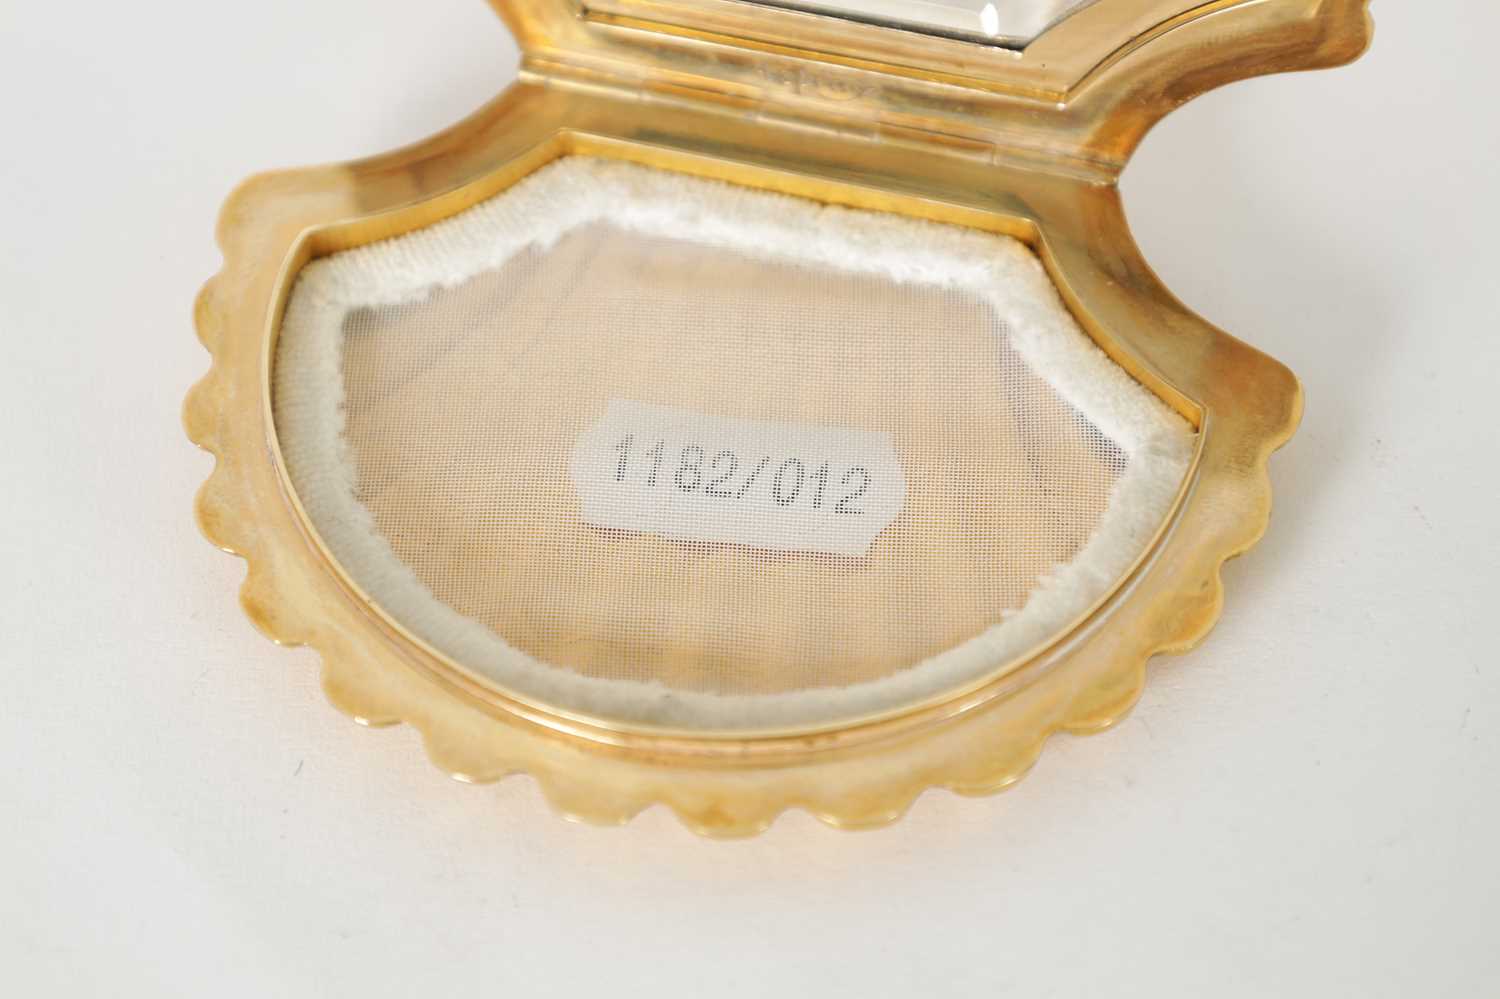 A 9CT .375 HALLMARKED GOLD POWDER COMPACT BY ASPREY - Image 4 of 8